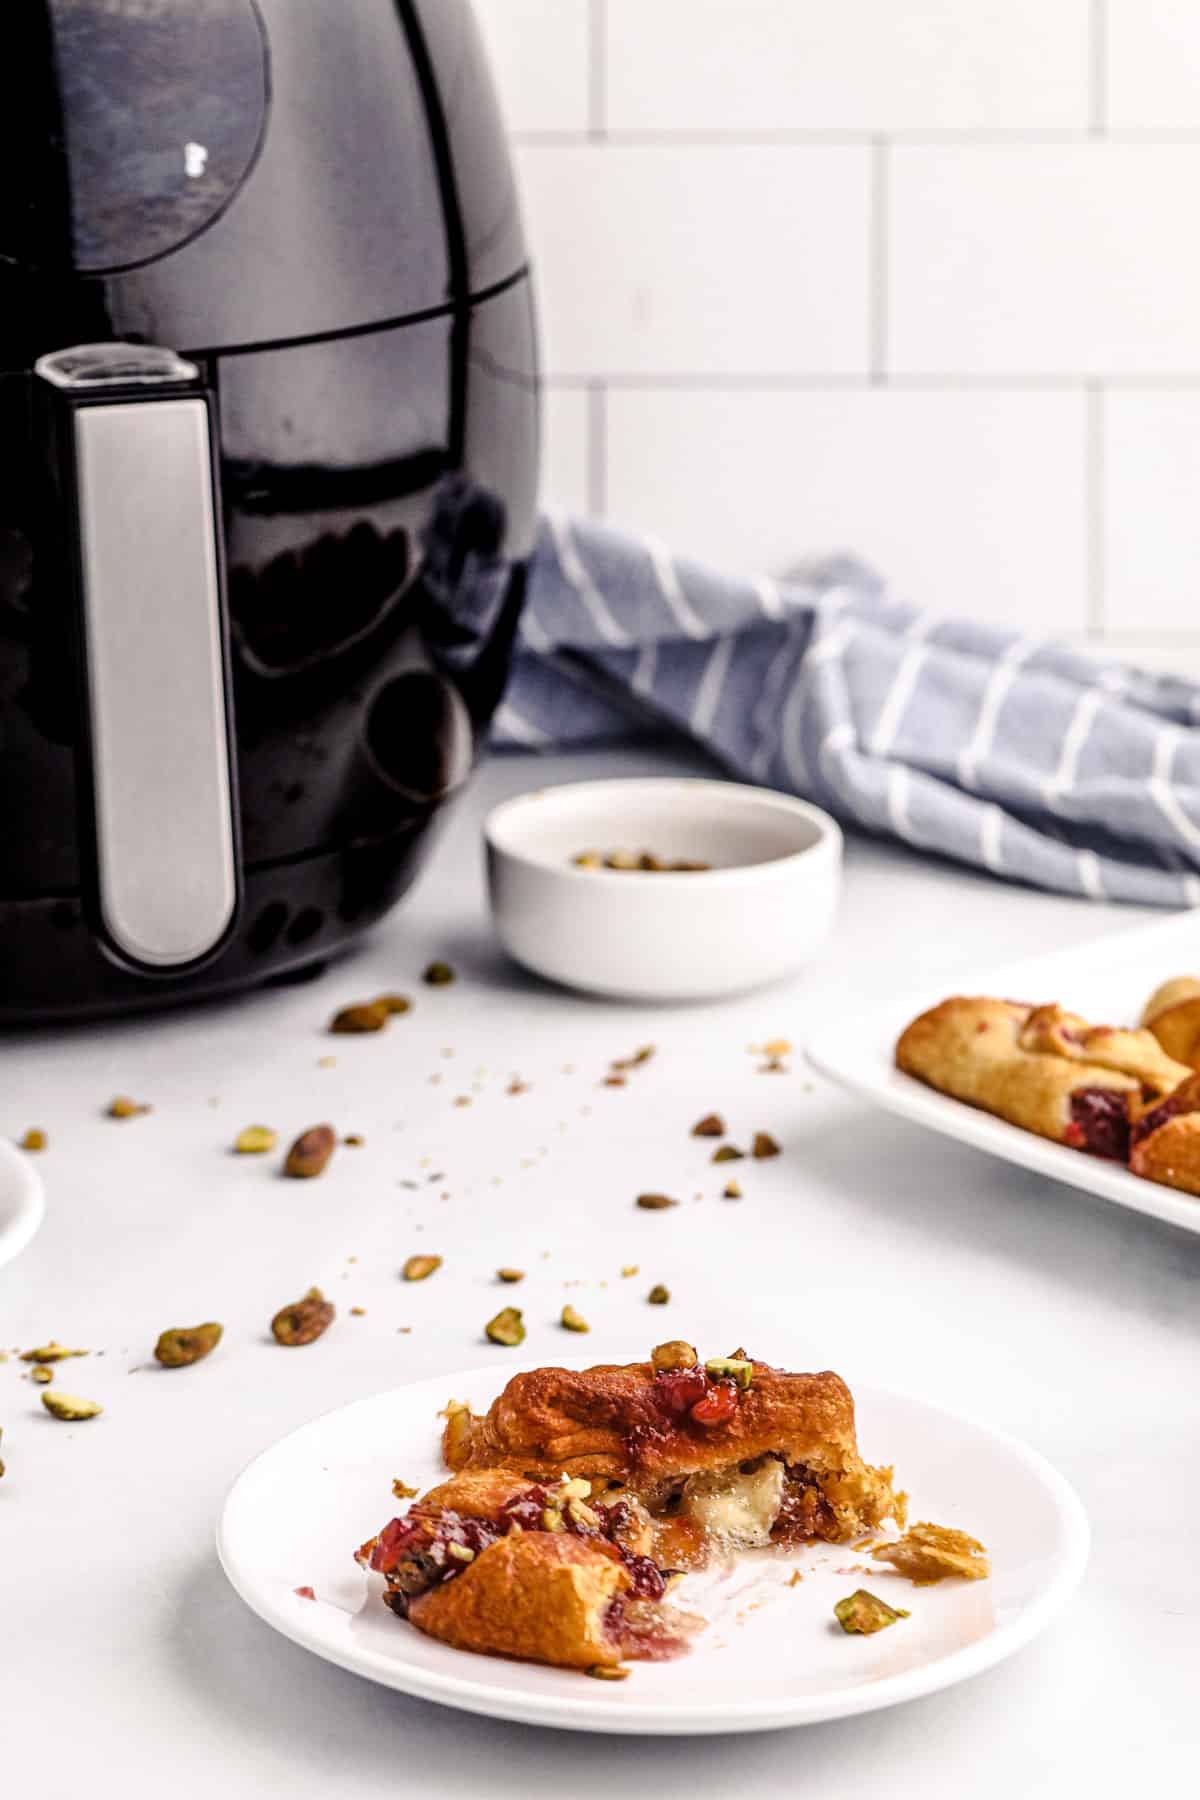 brie bites with nuts and cranberry next to an air fryer on the counter